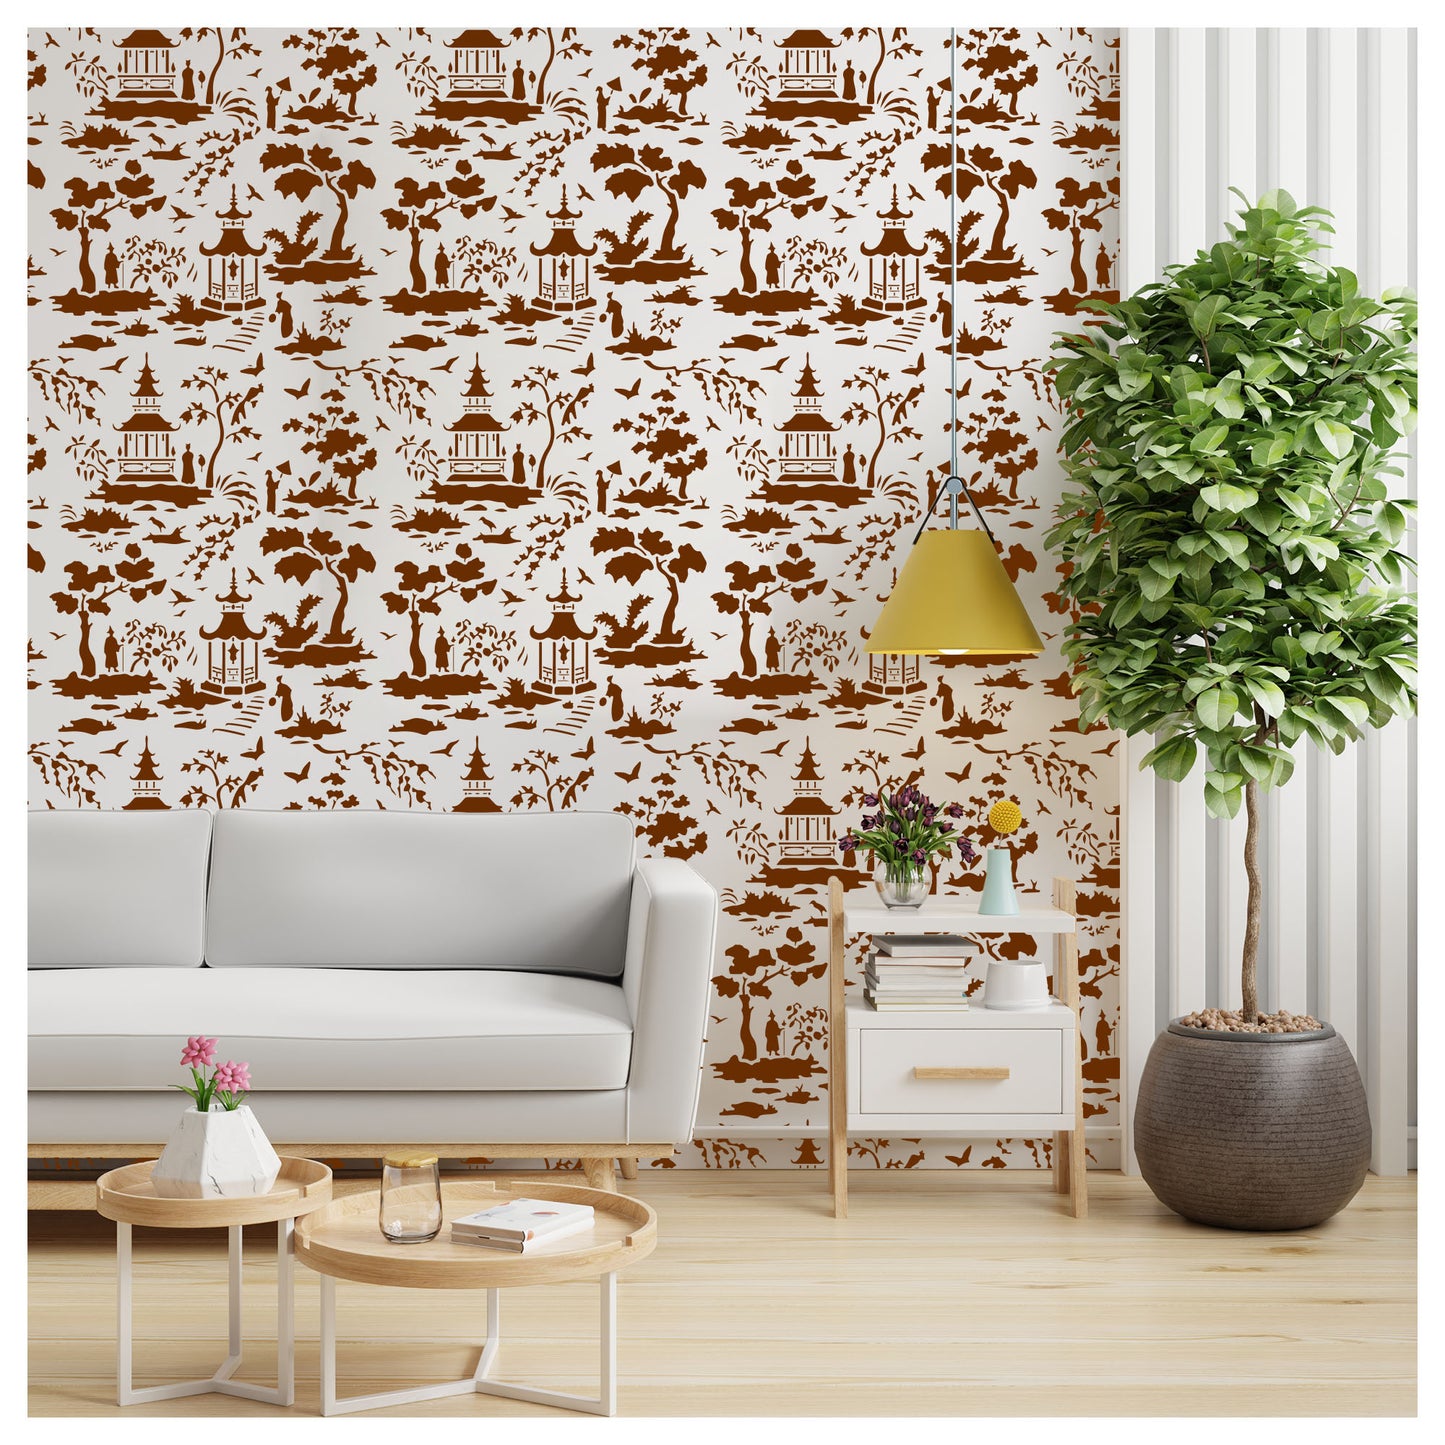 Hidden Oasis Toile Design Stencil for Wall Painting (KDMD1470)